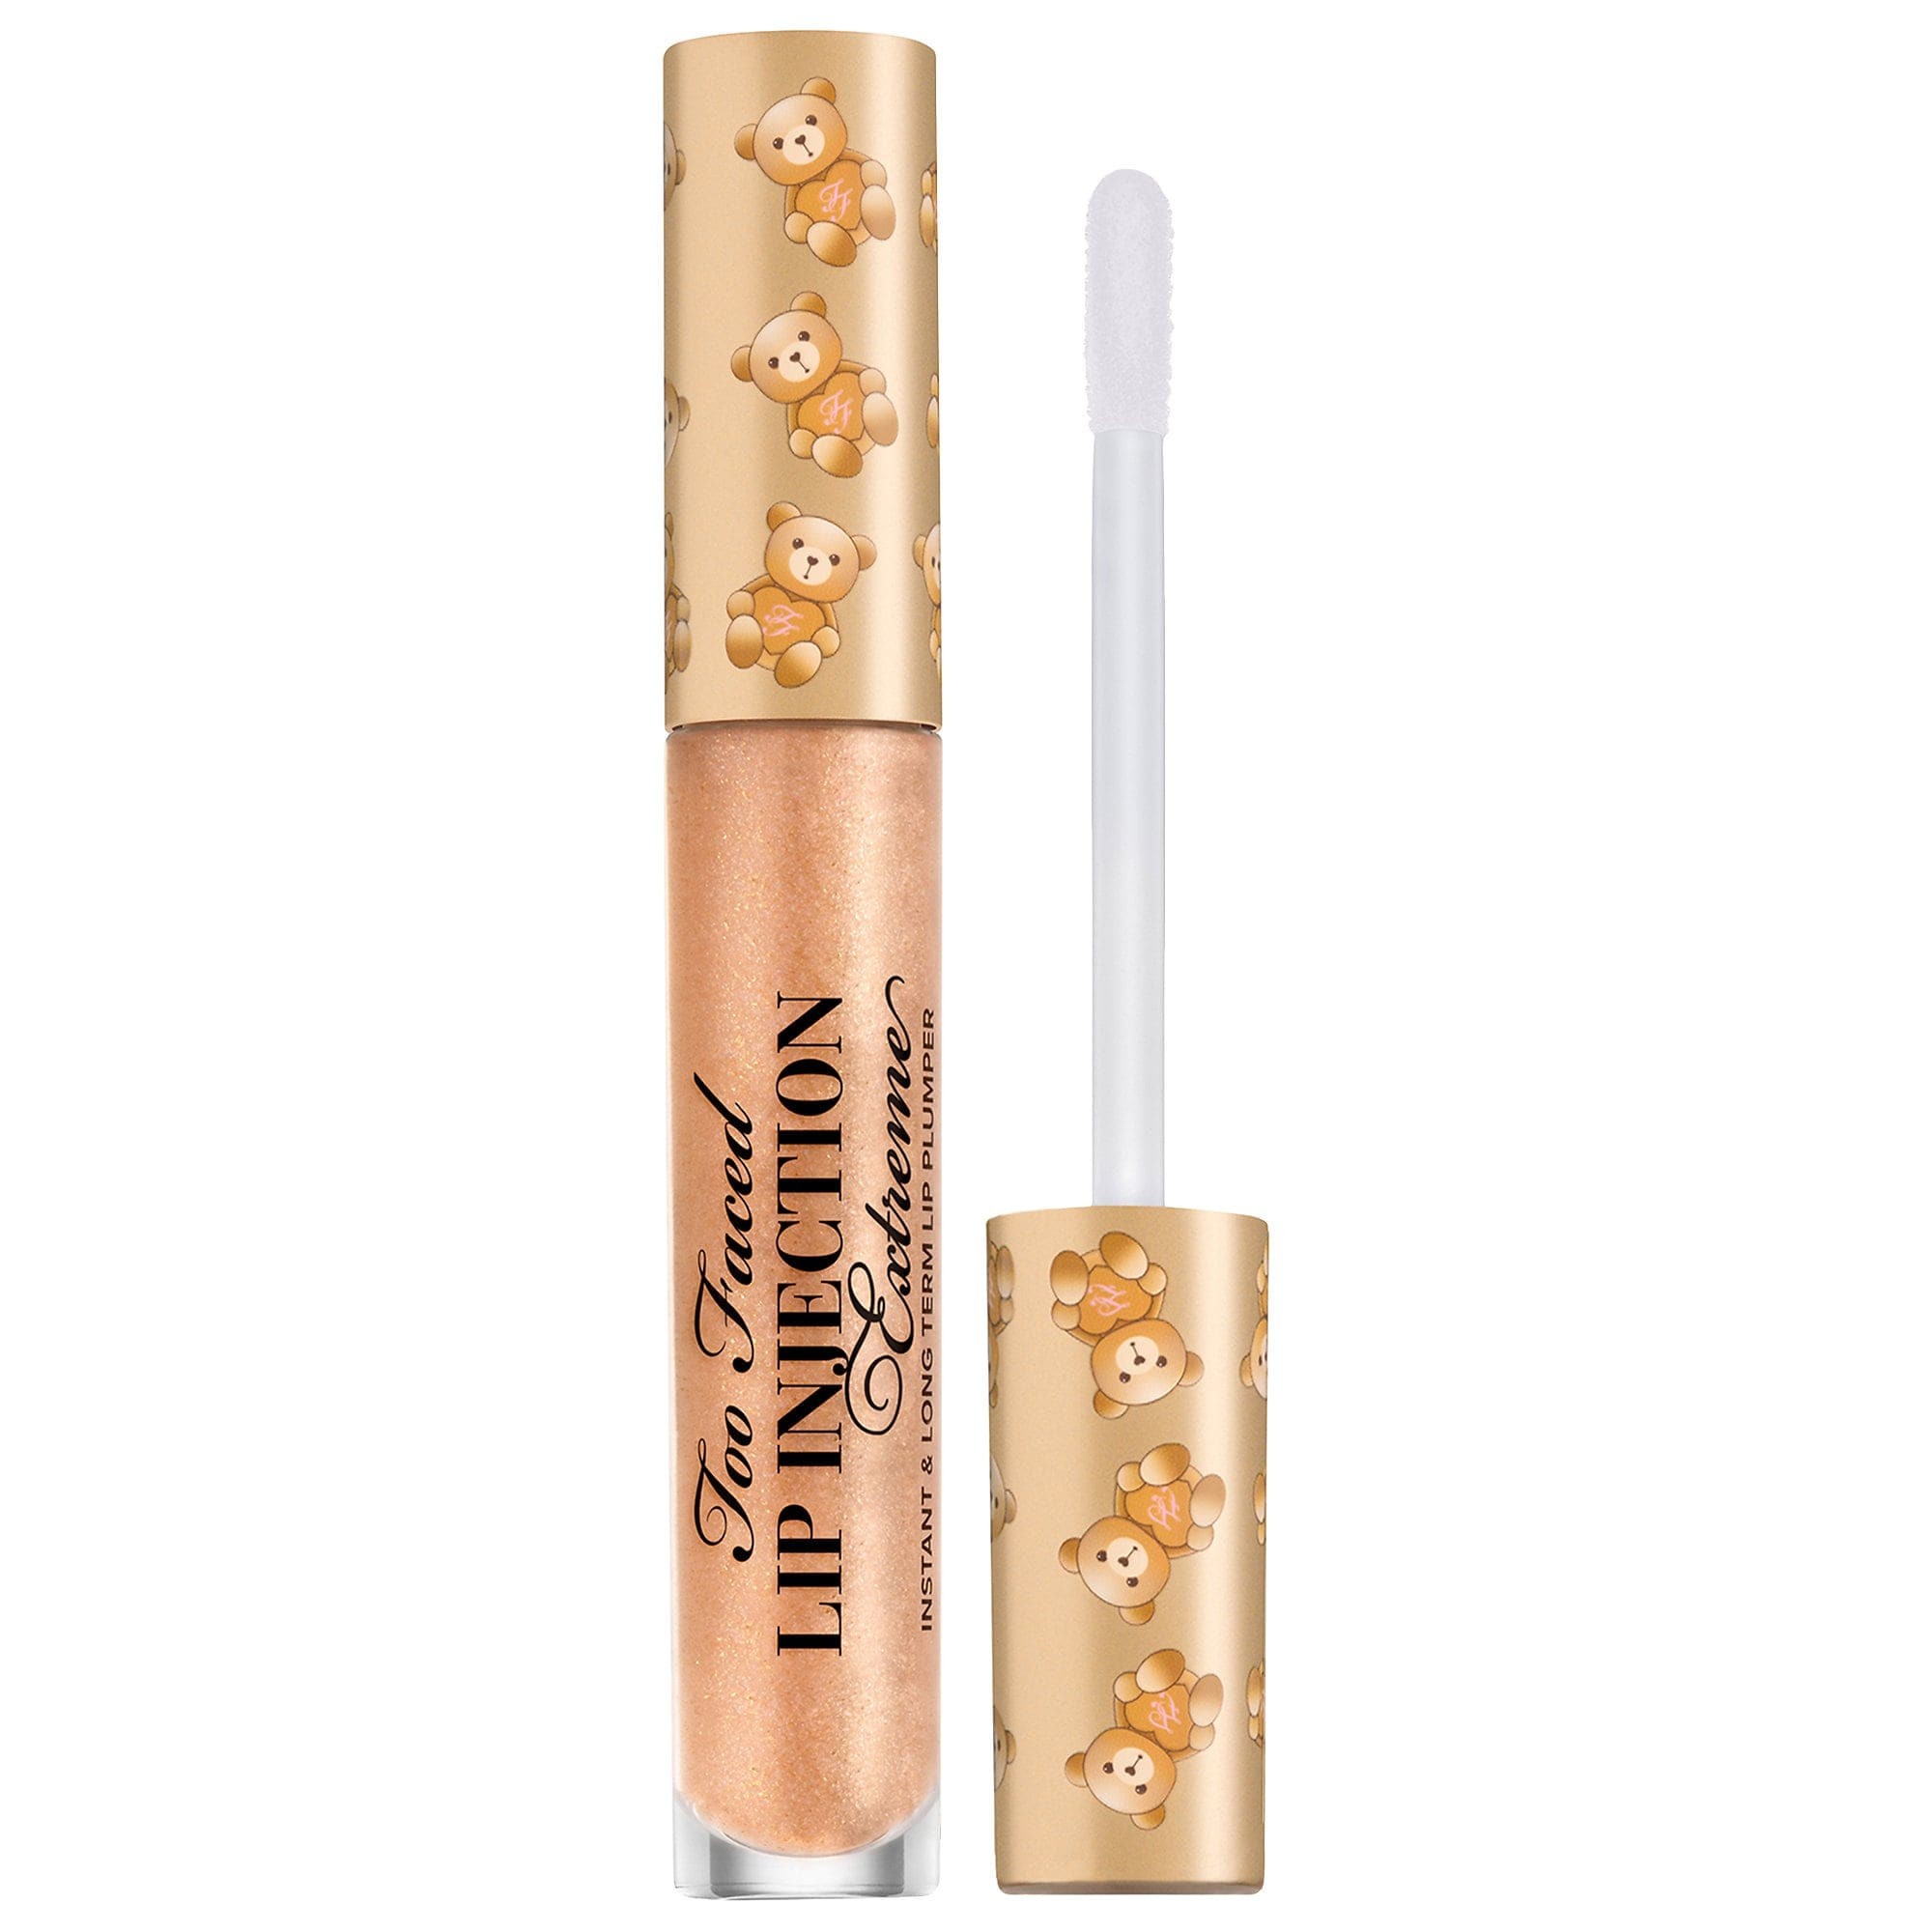 Too Faced Lip Injection Extreme Bee Sting Lip Plumper